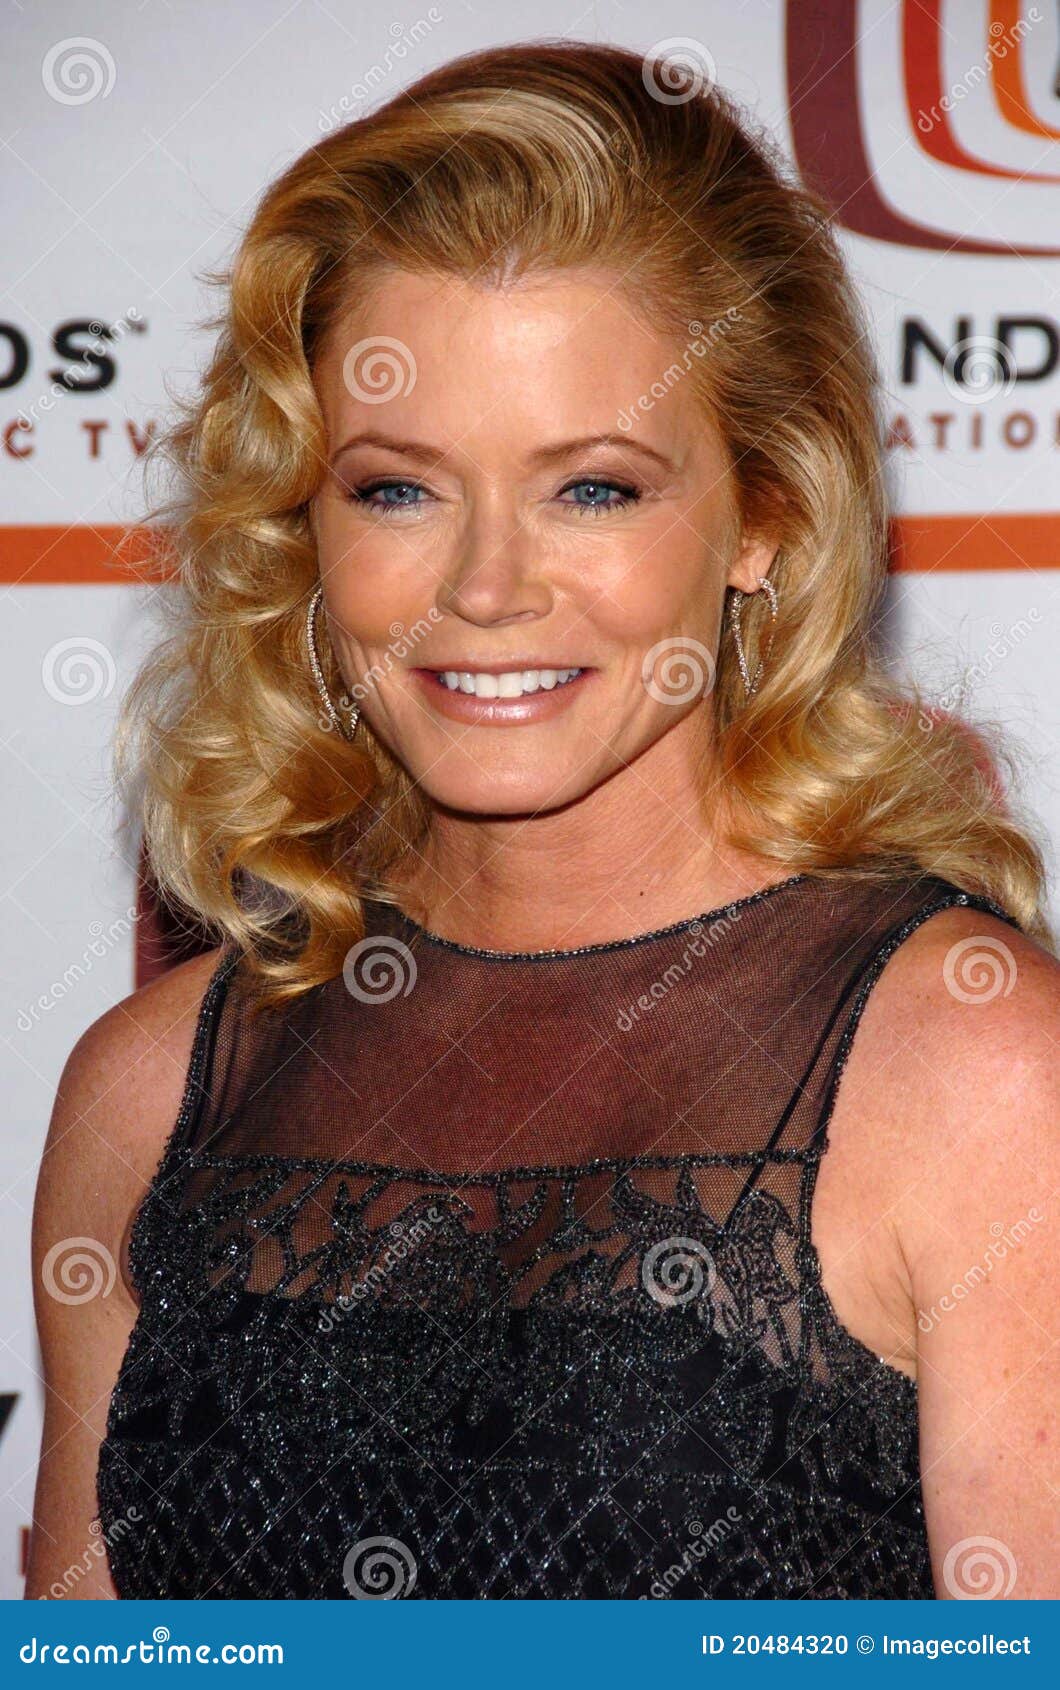 Pictures of sheree j.wilson